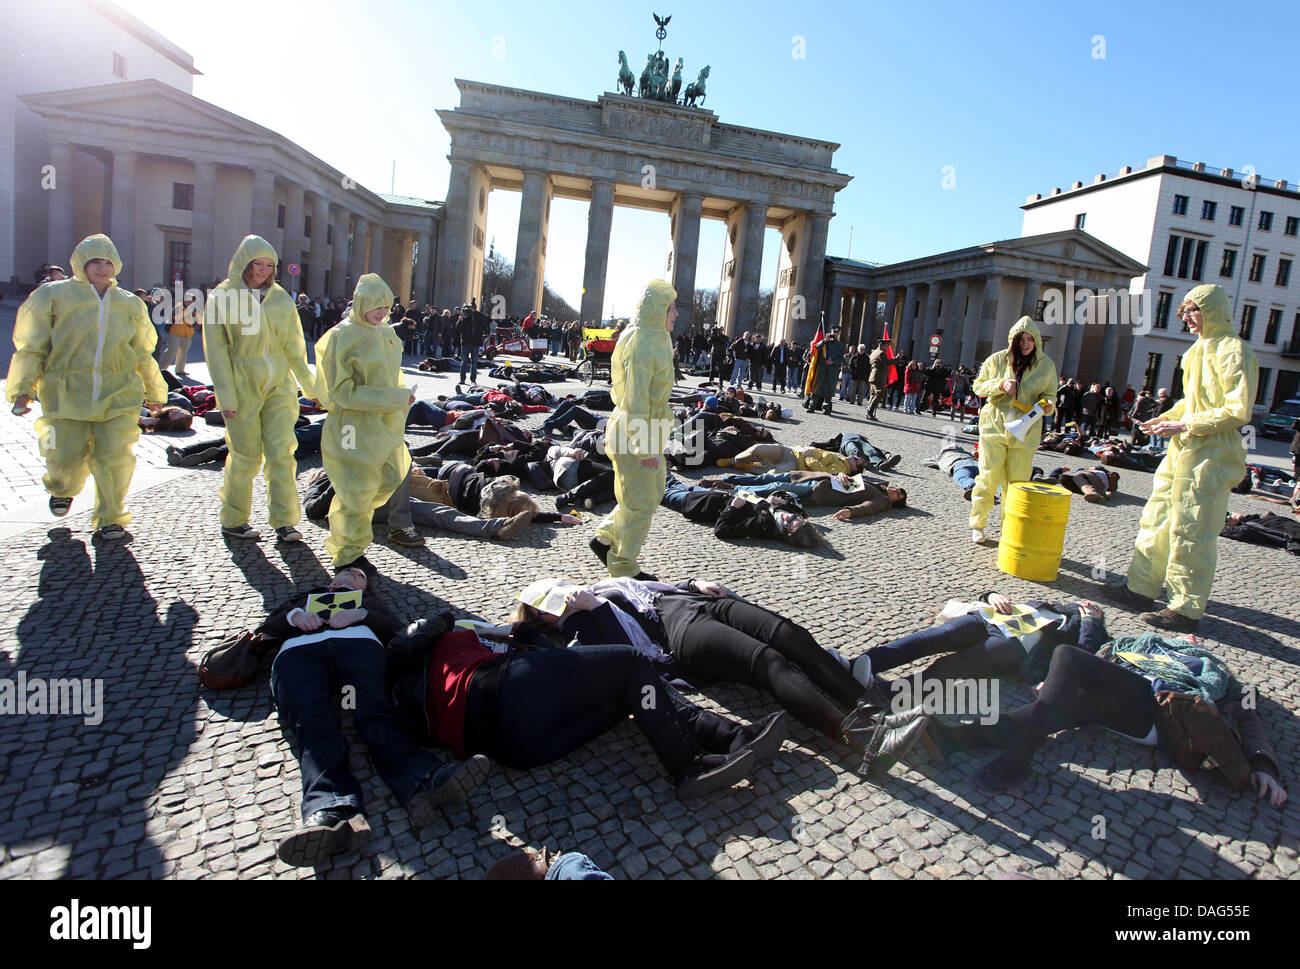 The 'victims' of a ficticious nuclear accident perform during a flashmob against nuclear energy at Pariser Platz in Berlin, Germany, 19 March 2011. 200 participants dropped to the floor and pretended to be dead at the same time after a whistle was heard. Photo: Florian Schuh Stock Photo